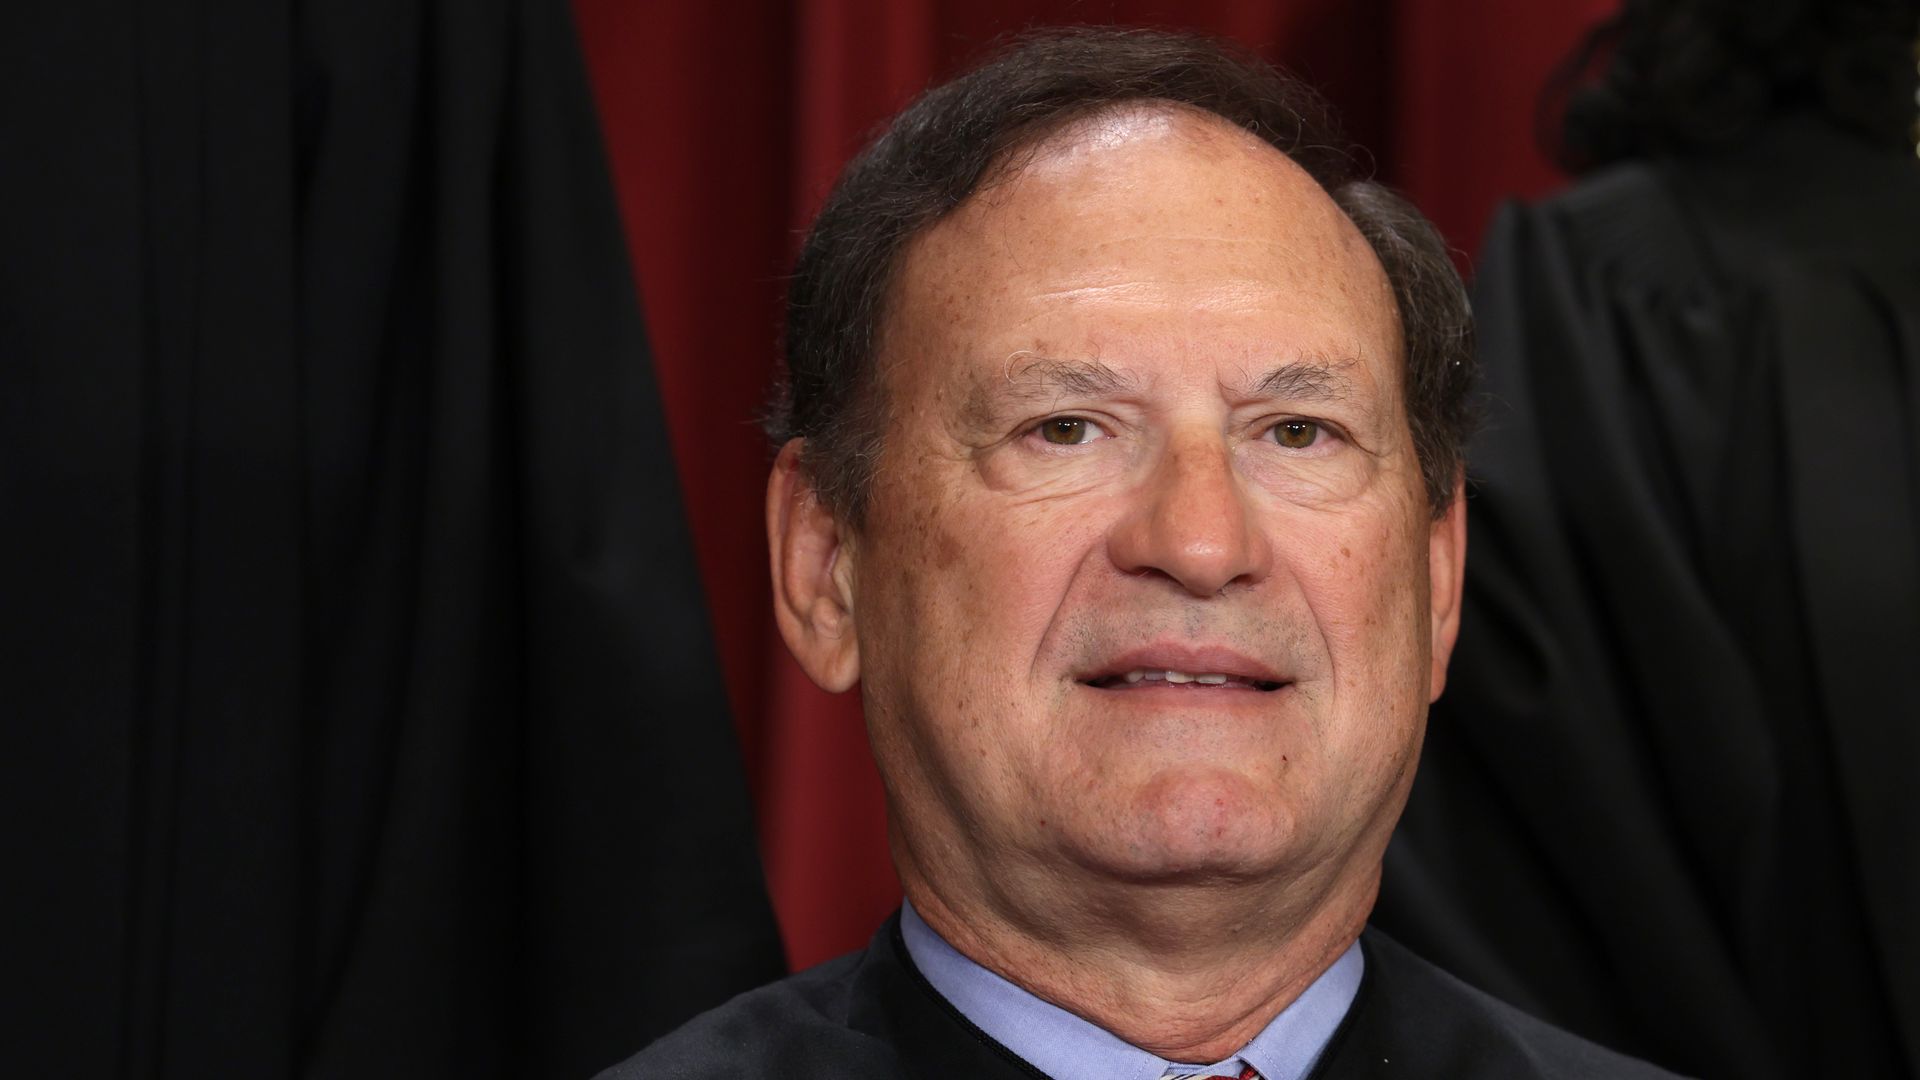 Alito looks at camera for official portrait 